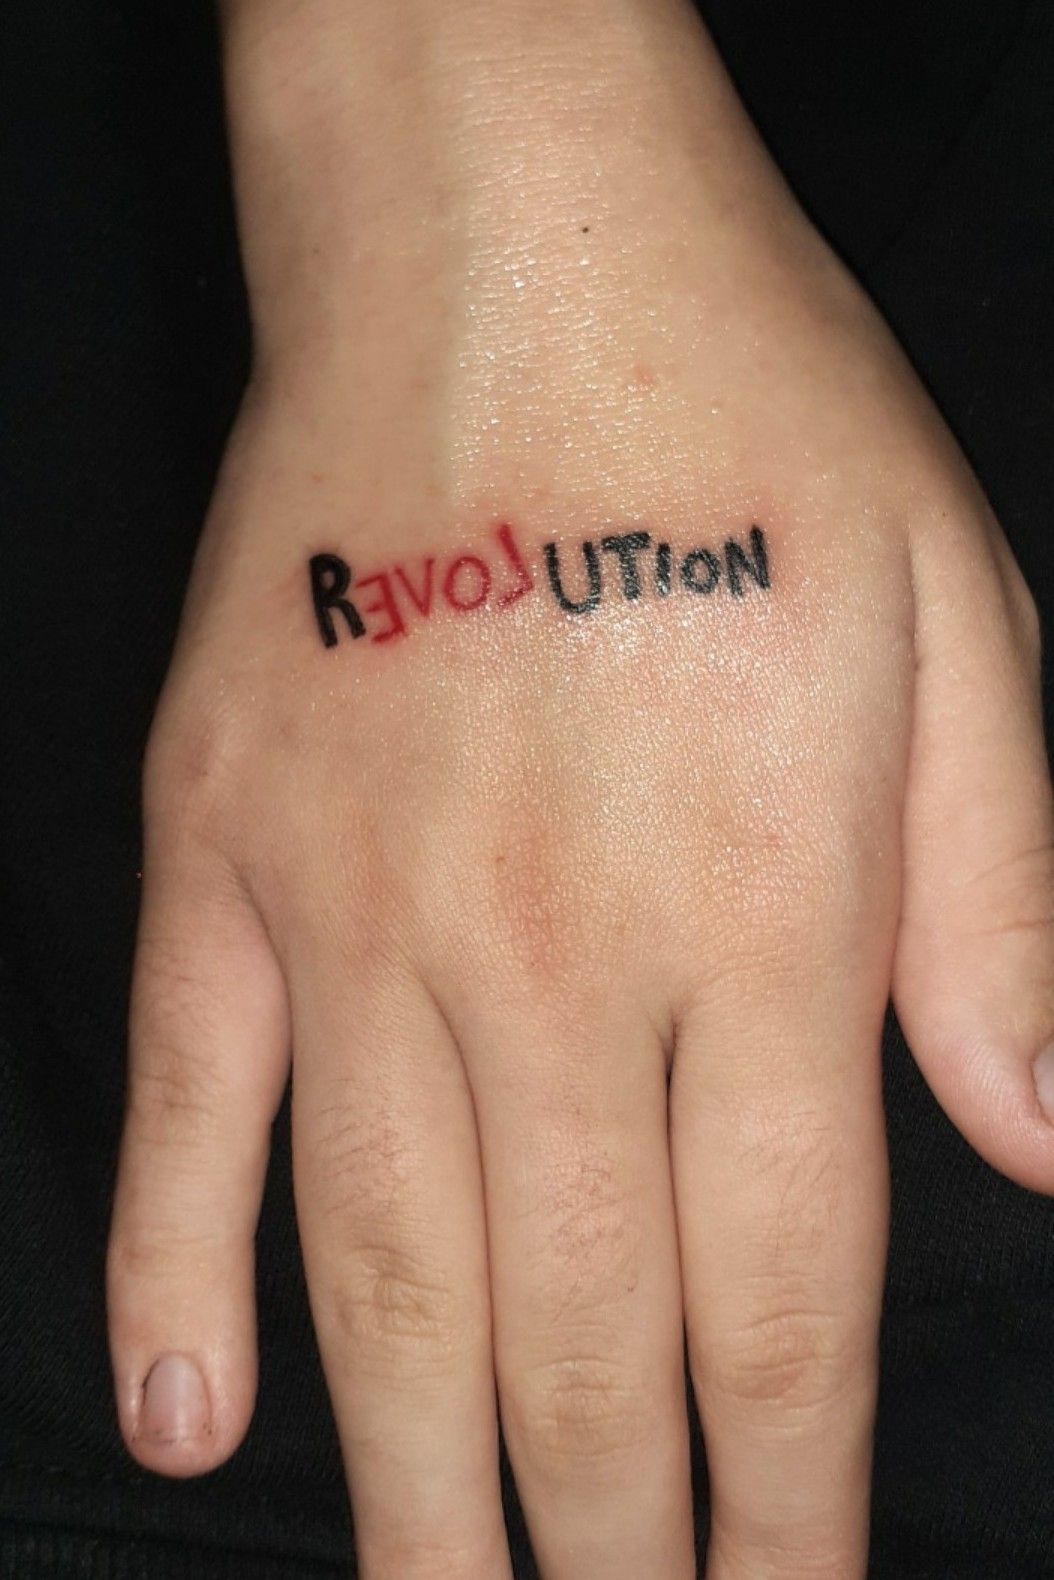 Tattoo uploaded by Rachel Dawson • Spring Revolution tattoos for protestors  showing their support. Photo by DXStationey on Twitter. #springrevolution  #myanmartattoos #myanmarprotest #protesttattoos • Tattoodo